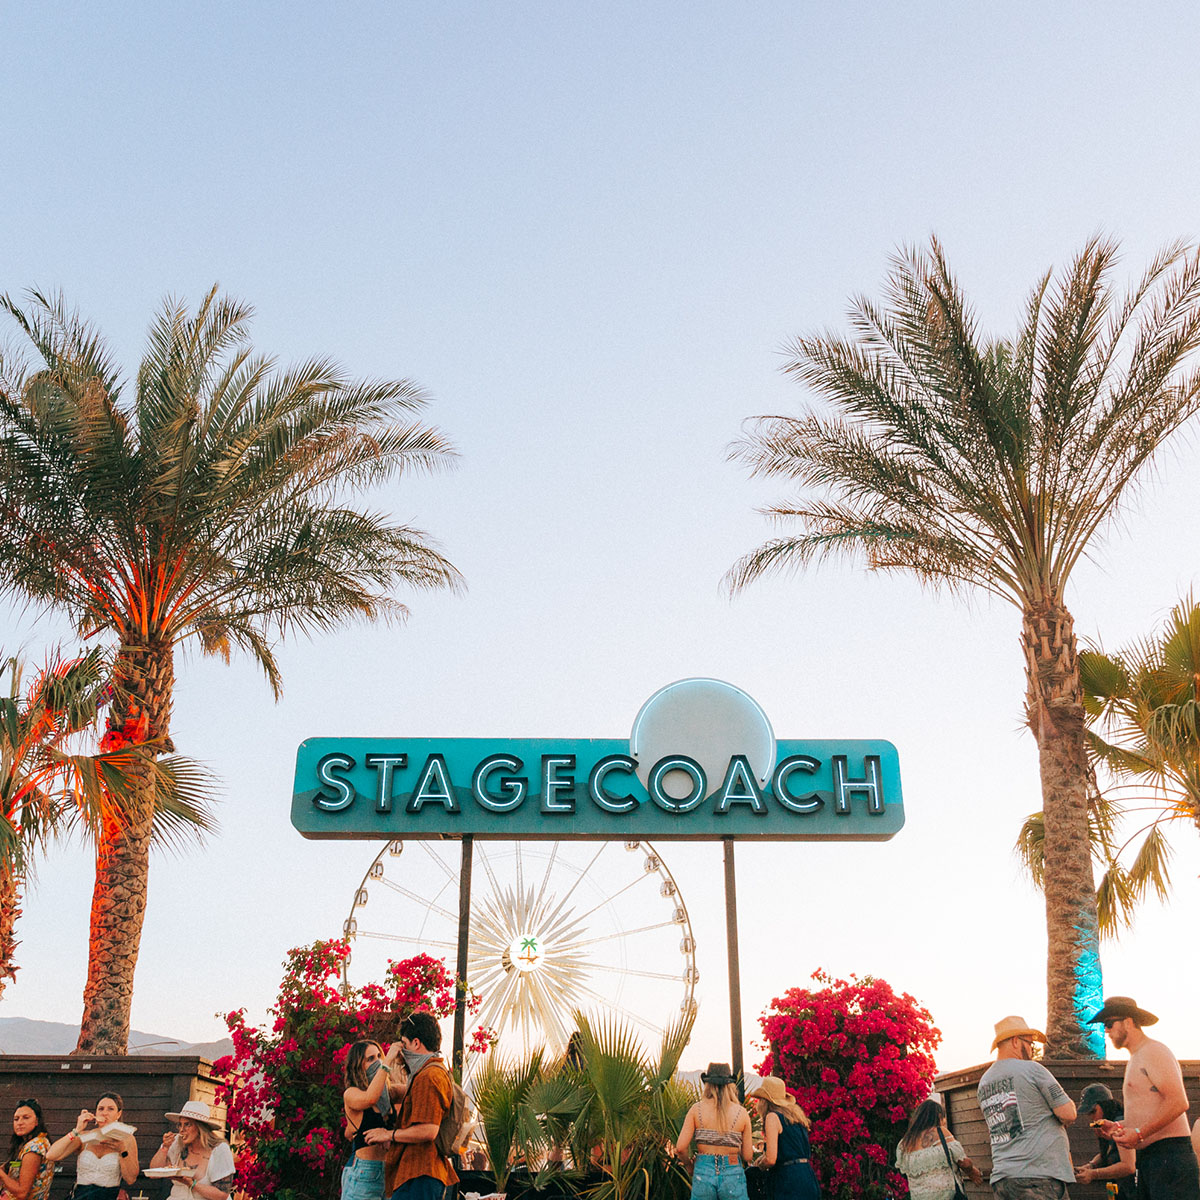 Stagecoach sign with palm trees